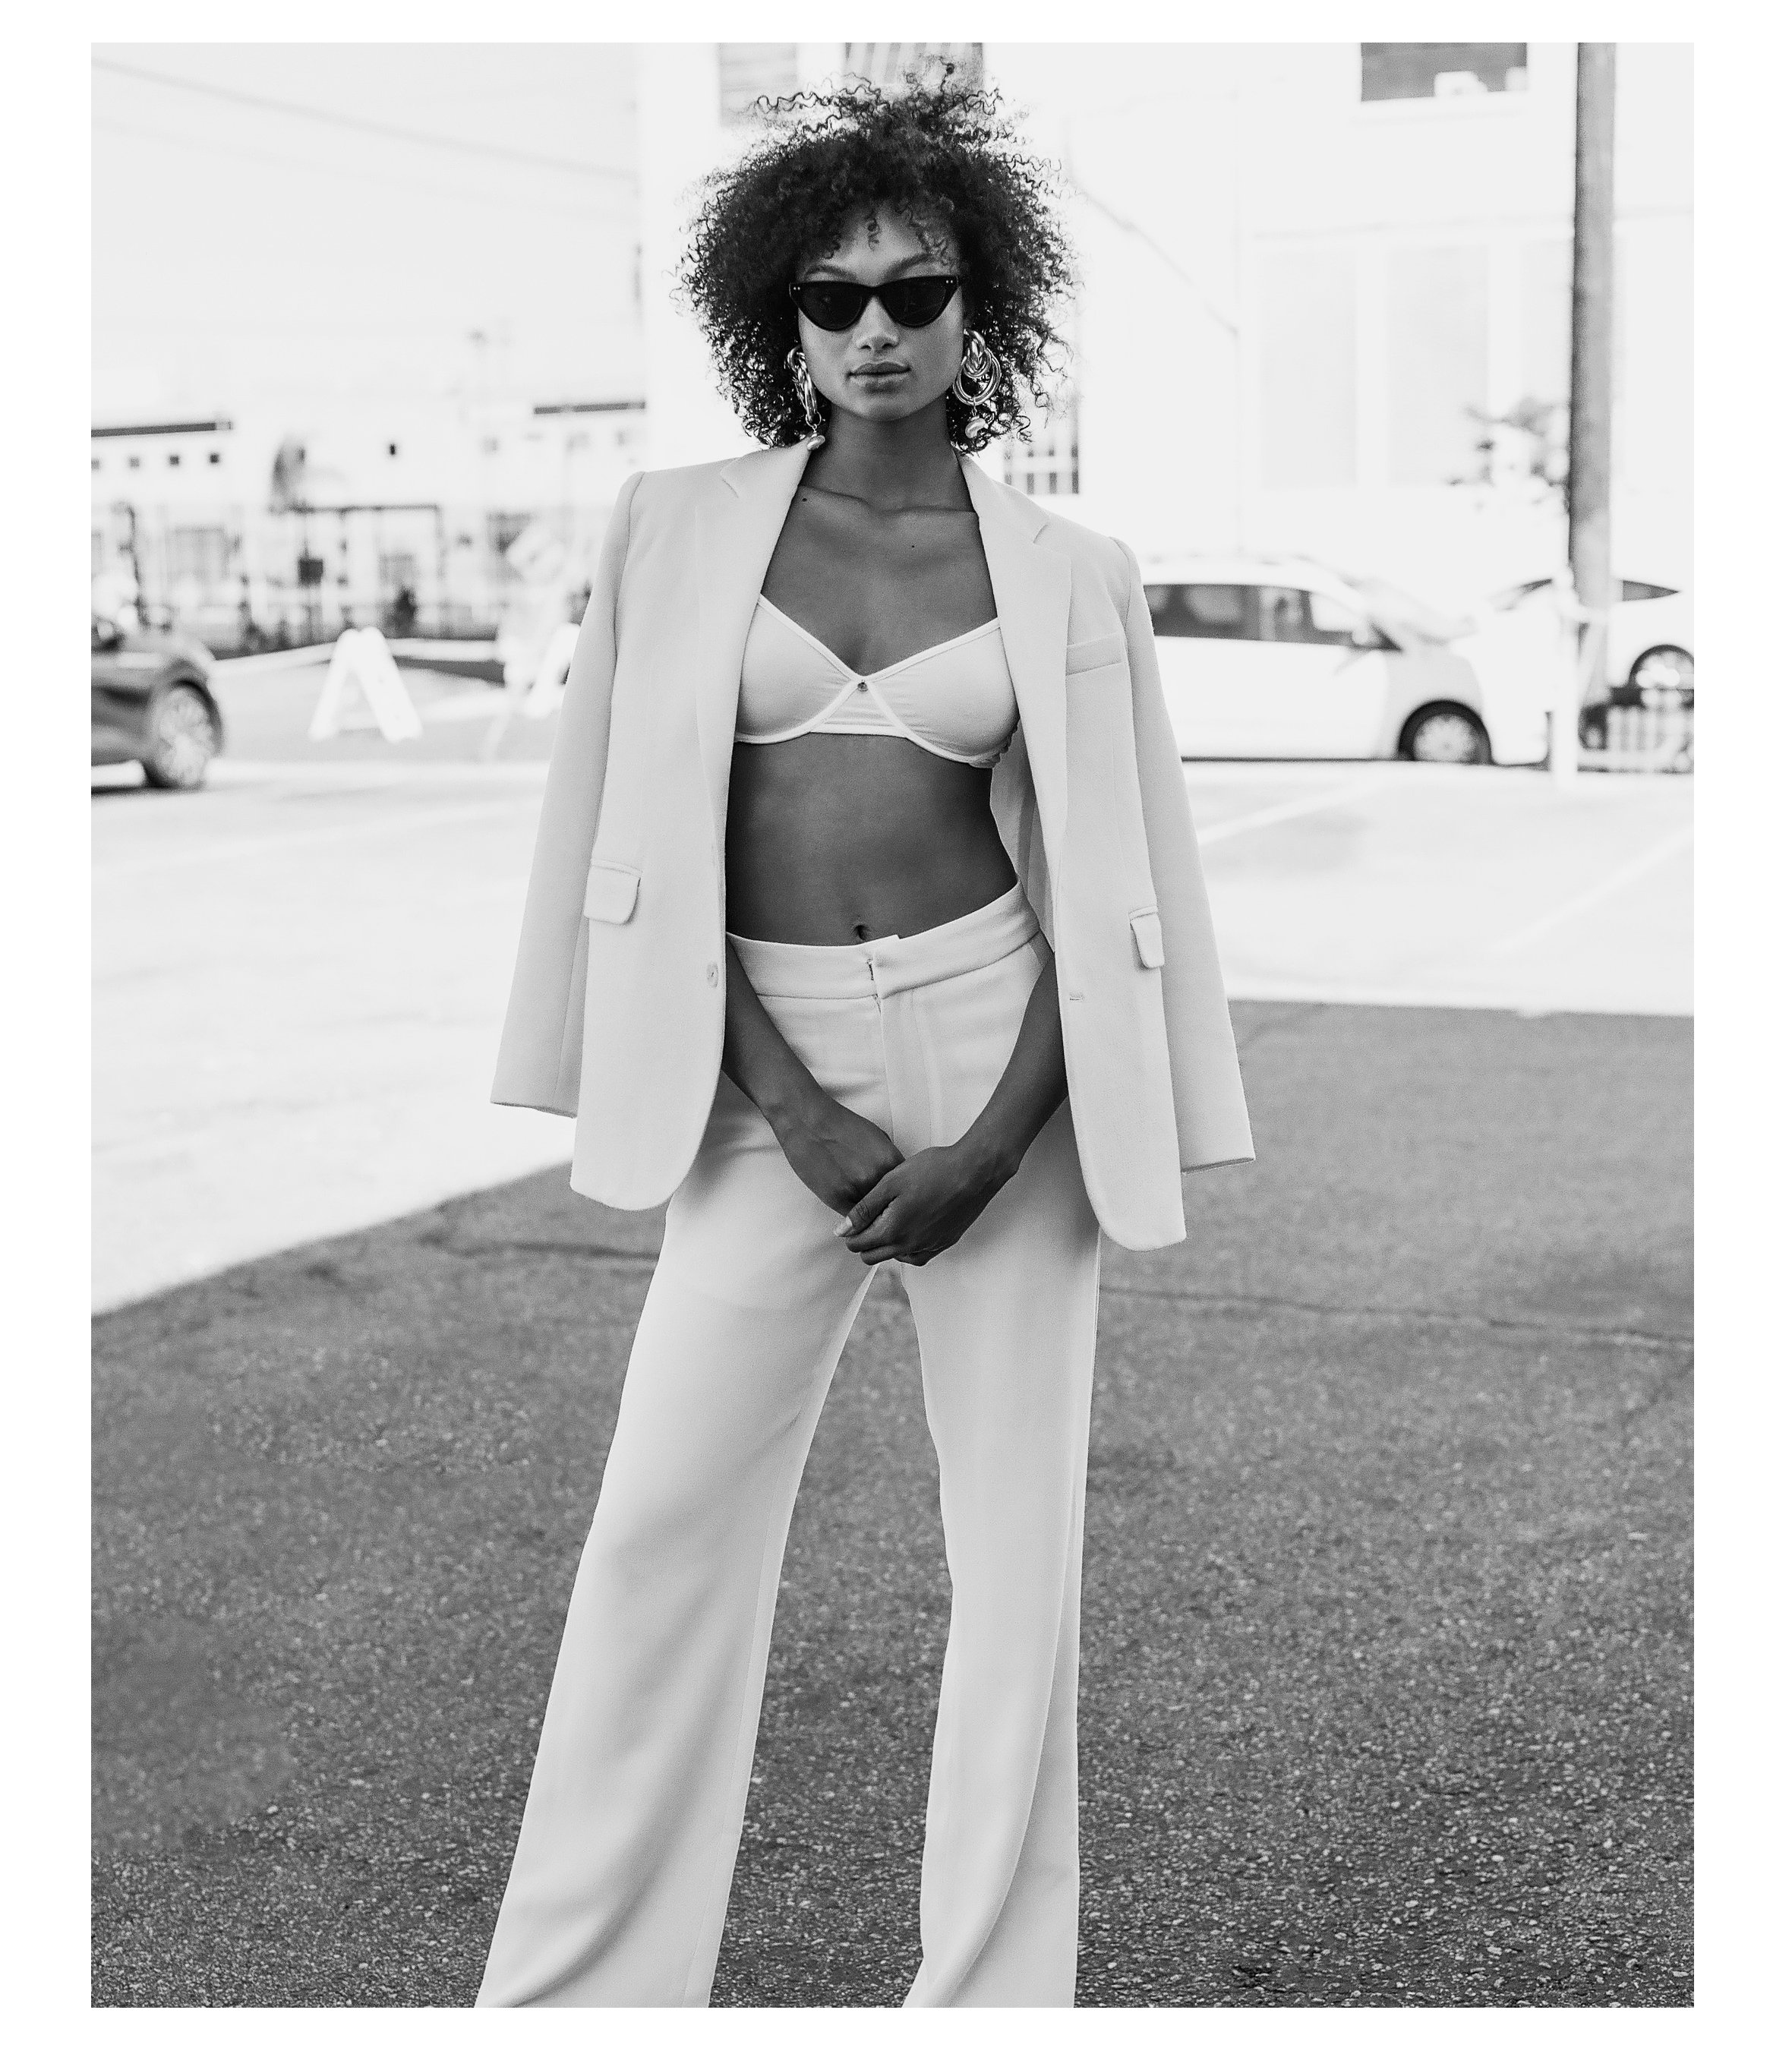  Model shot in black and white styled with cat eye sunglasses, and white suit. Styled by Emily Burnette. 